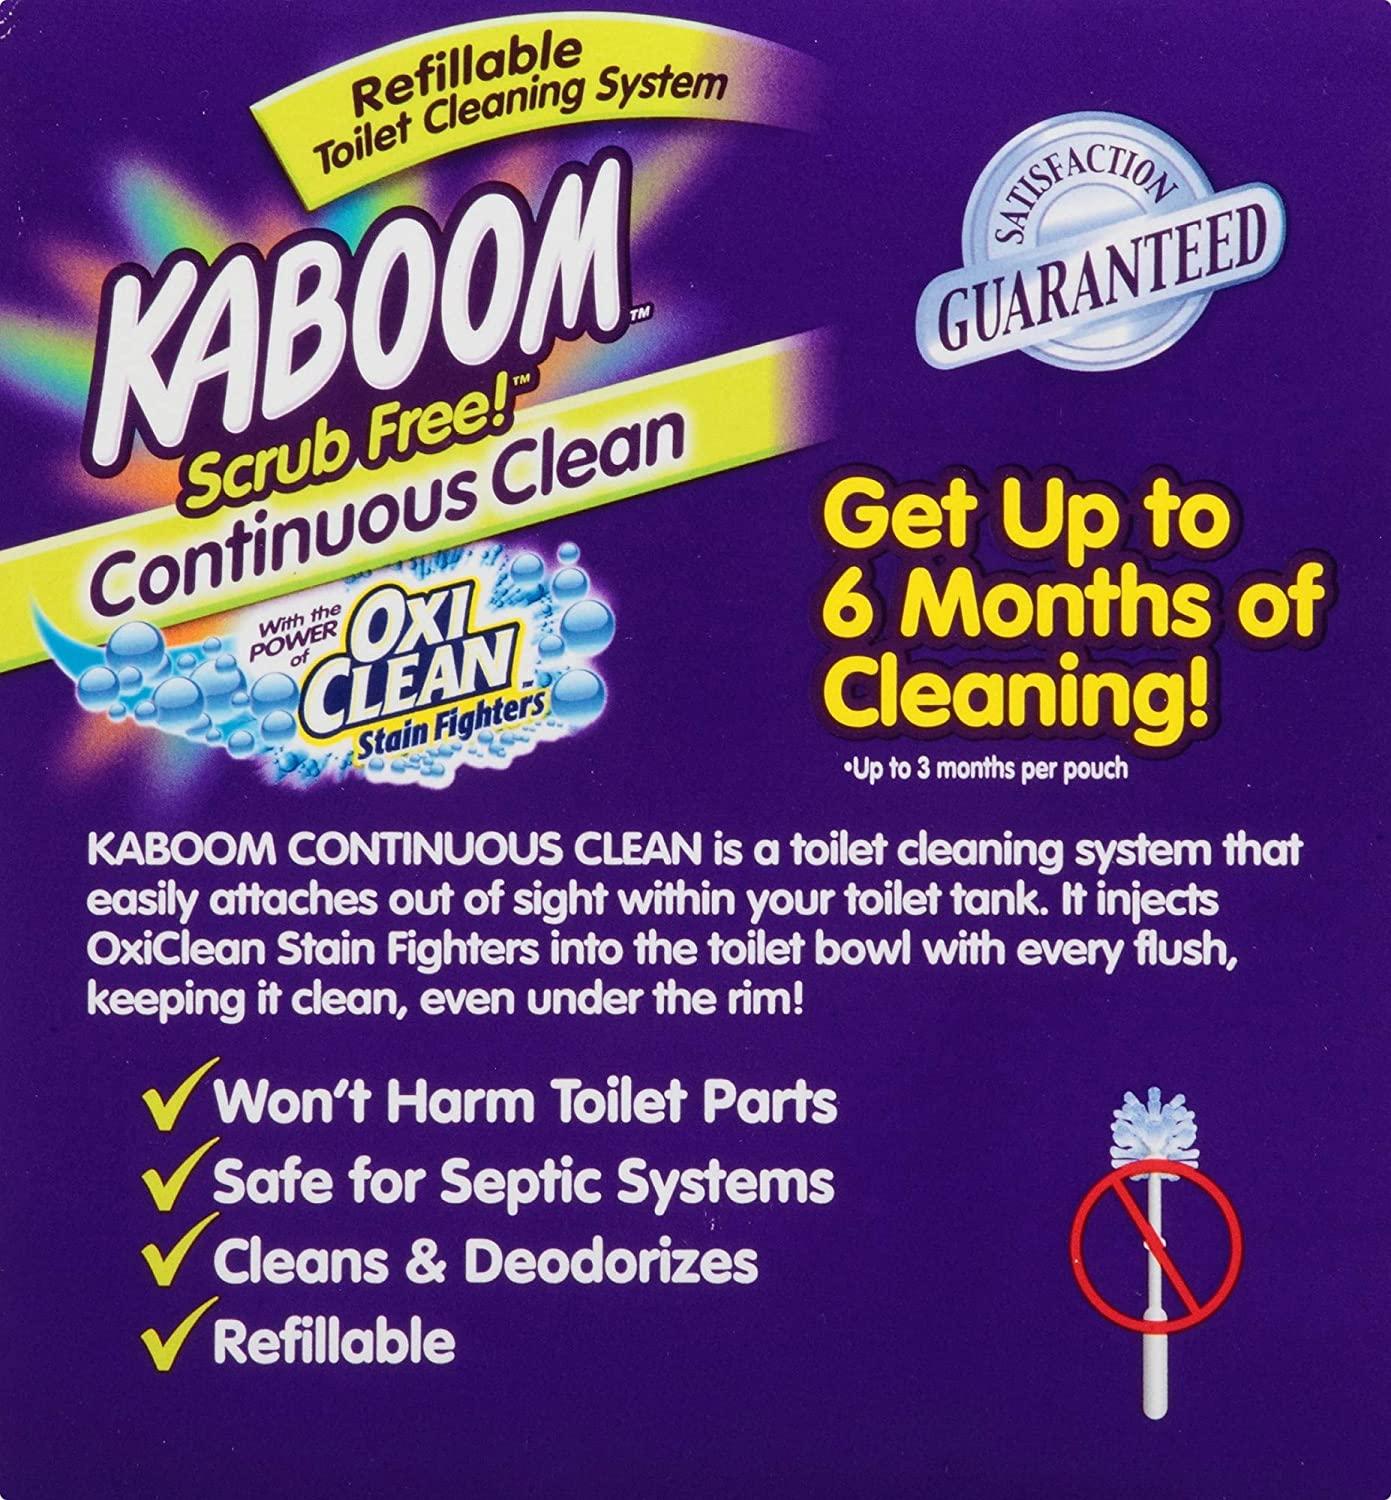  Kaboom Scrub Free! Toilet Bowl Cleaner System with 2 Refills :  Health & Household